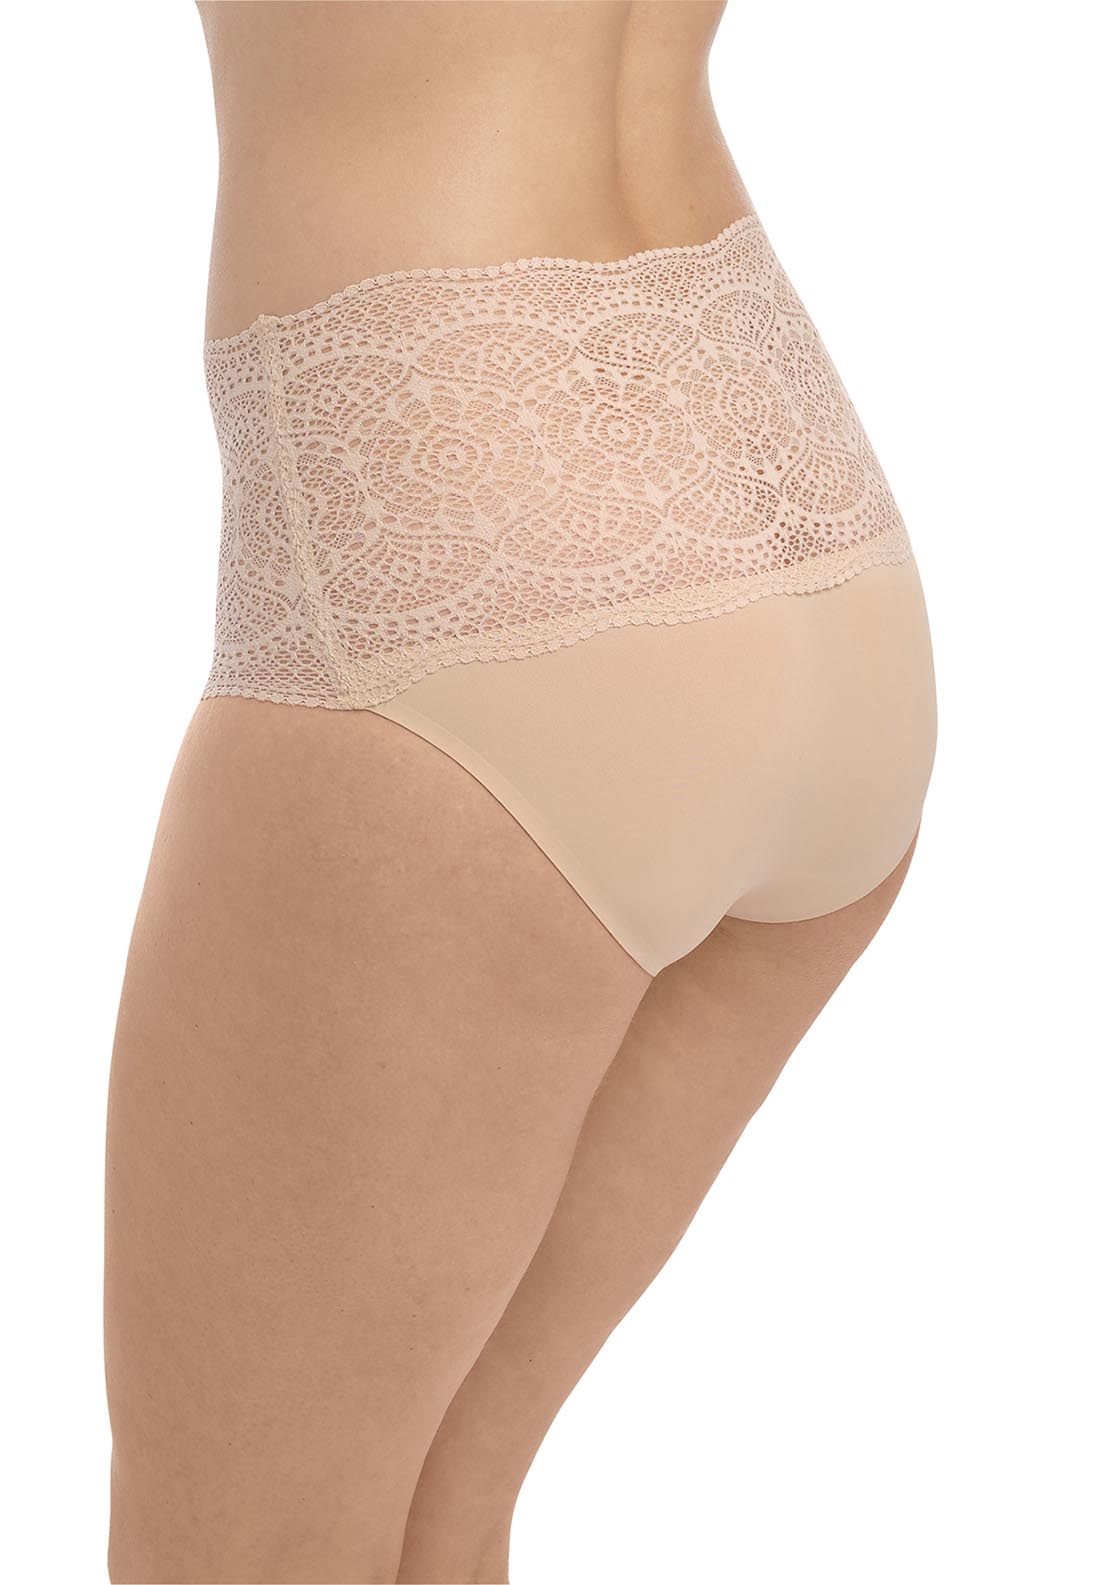 Fantasie Lace Ease Invisible Stretch Full Briefs 3 Shaws Department Stores